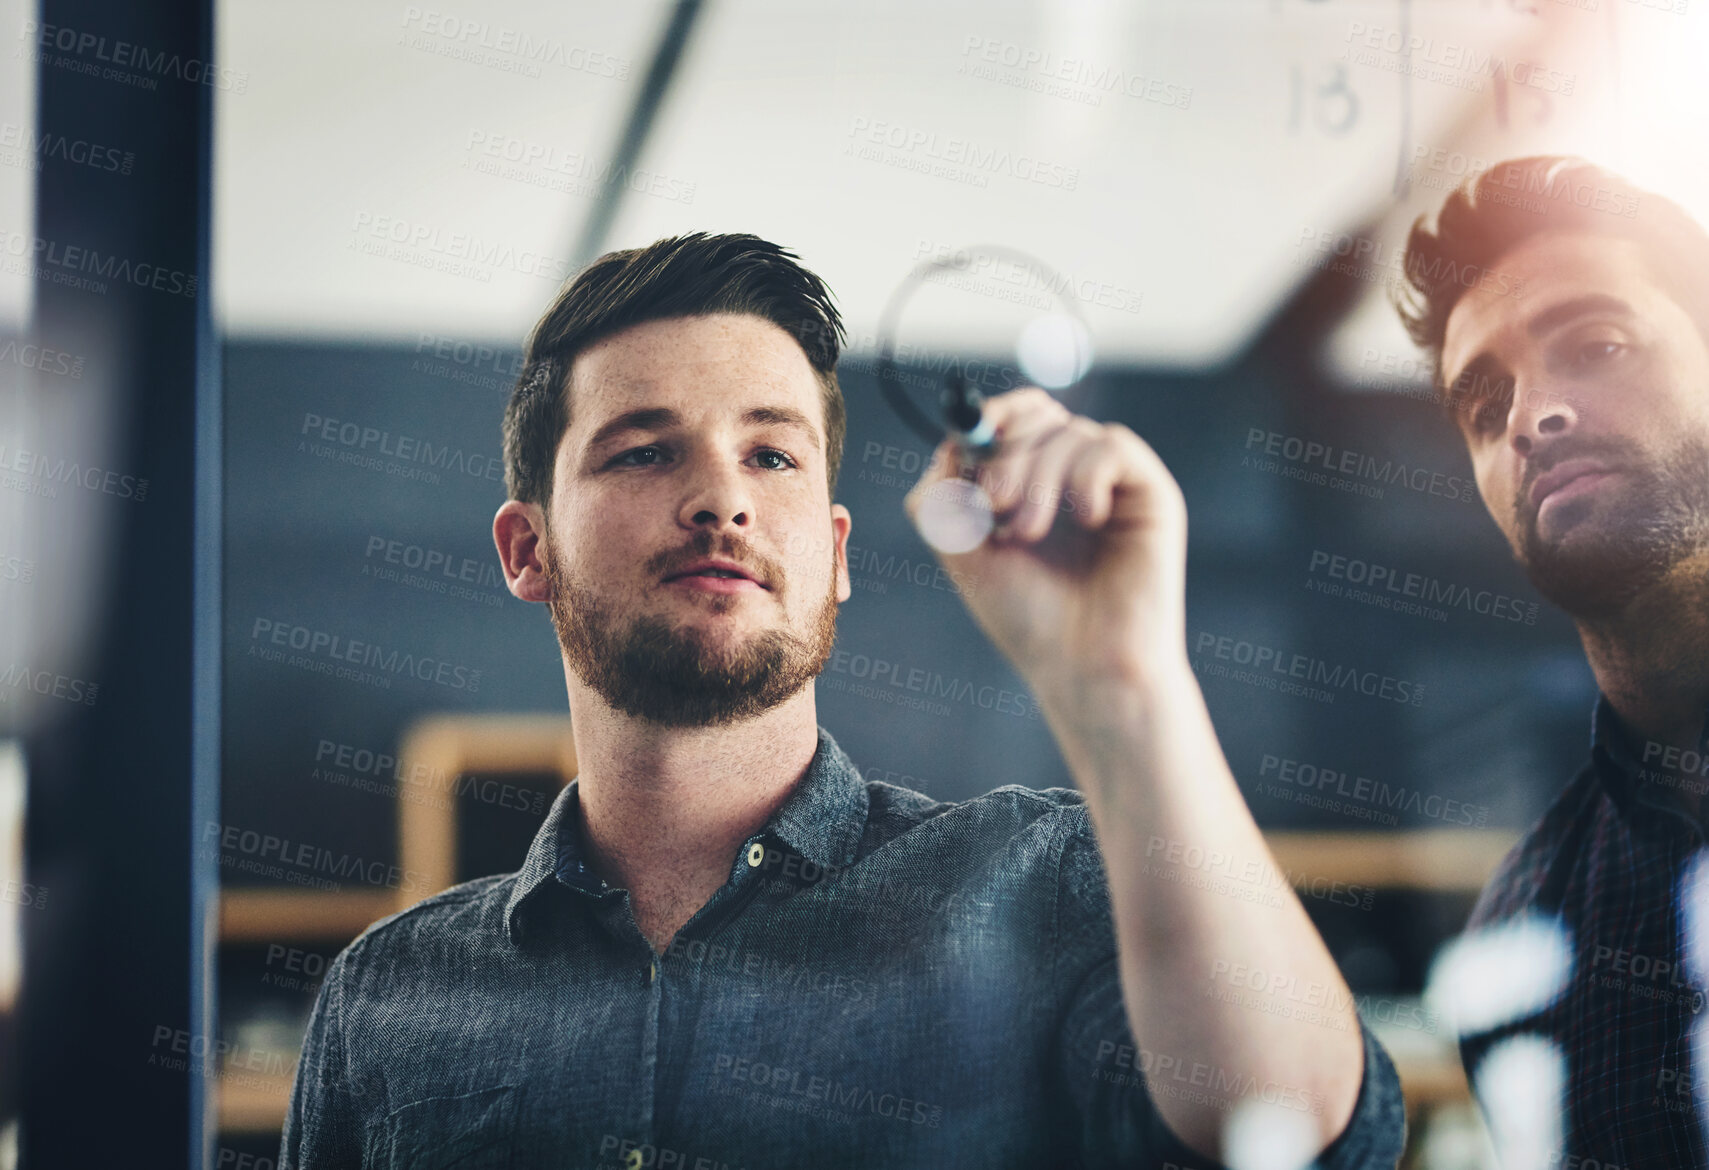 Buy stock photo Shot of two young businessmen brainstorming on a glass wall in an office